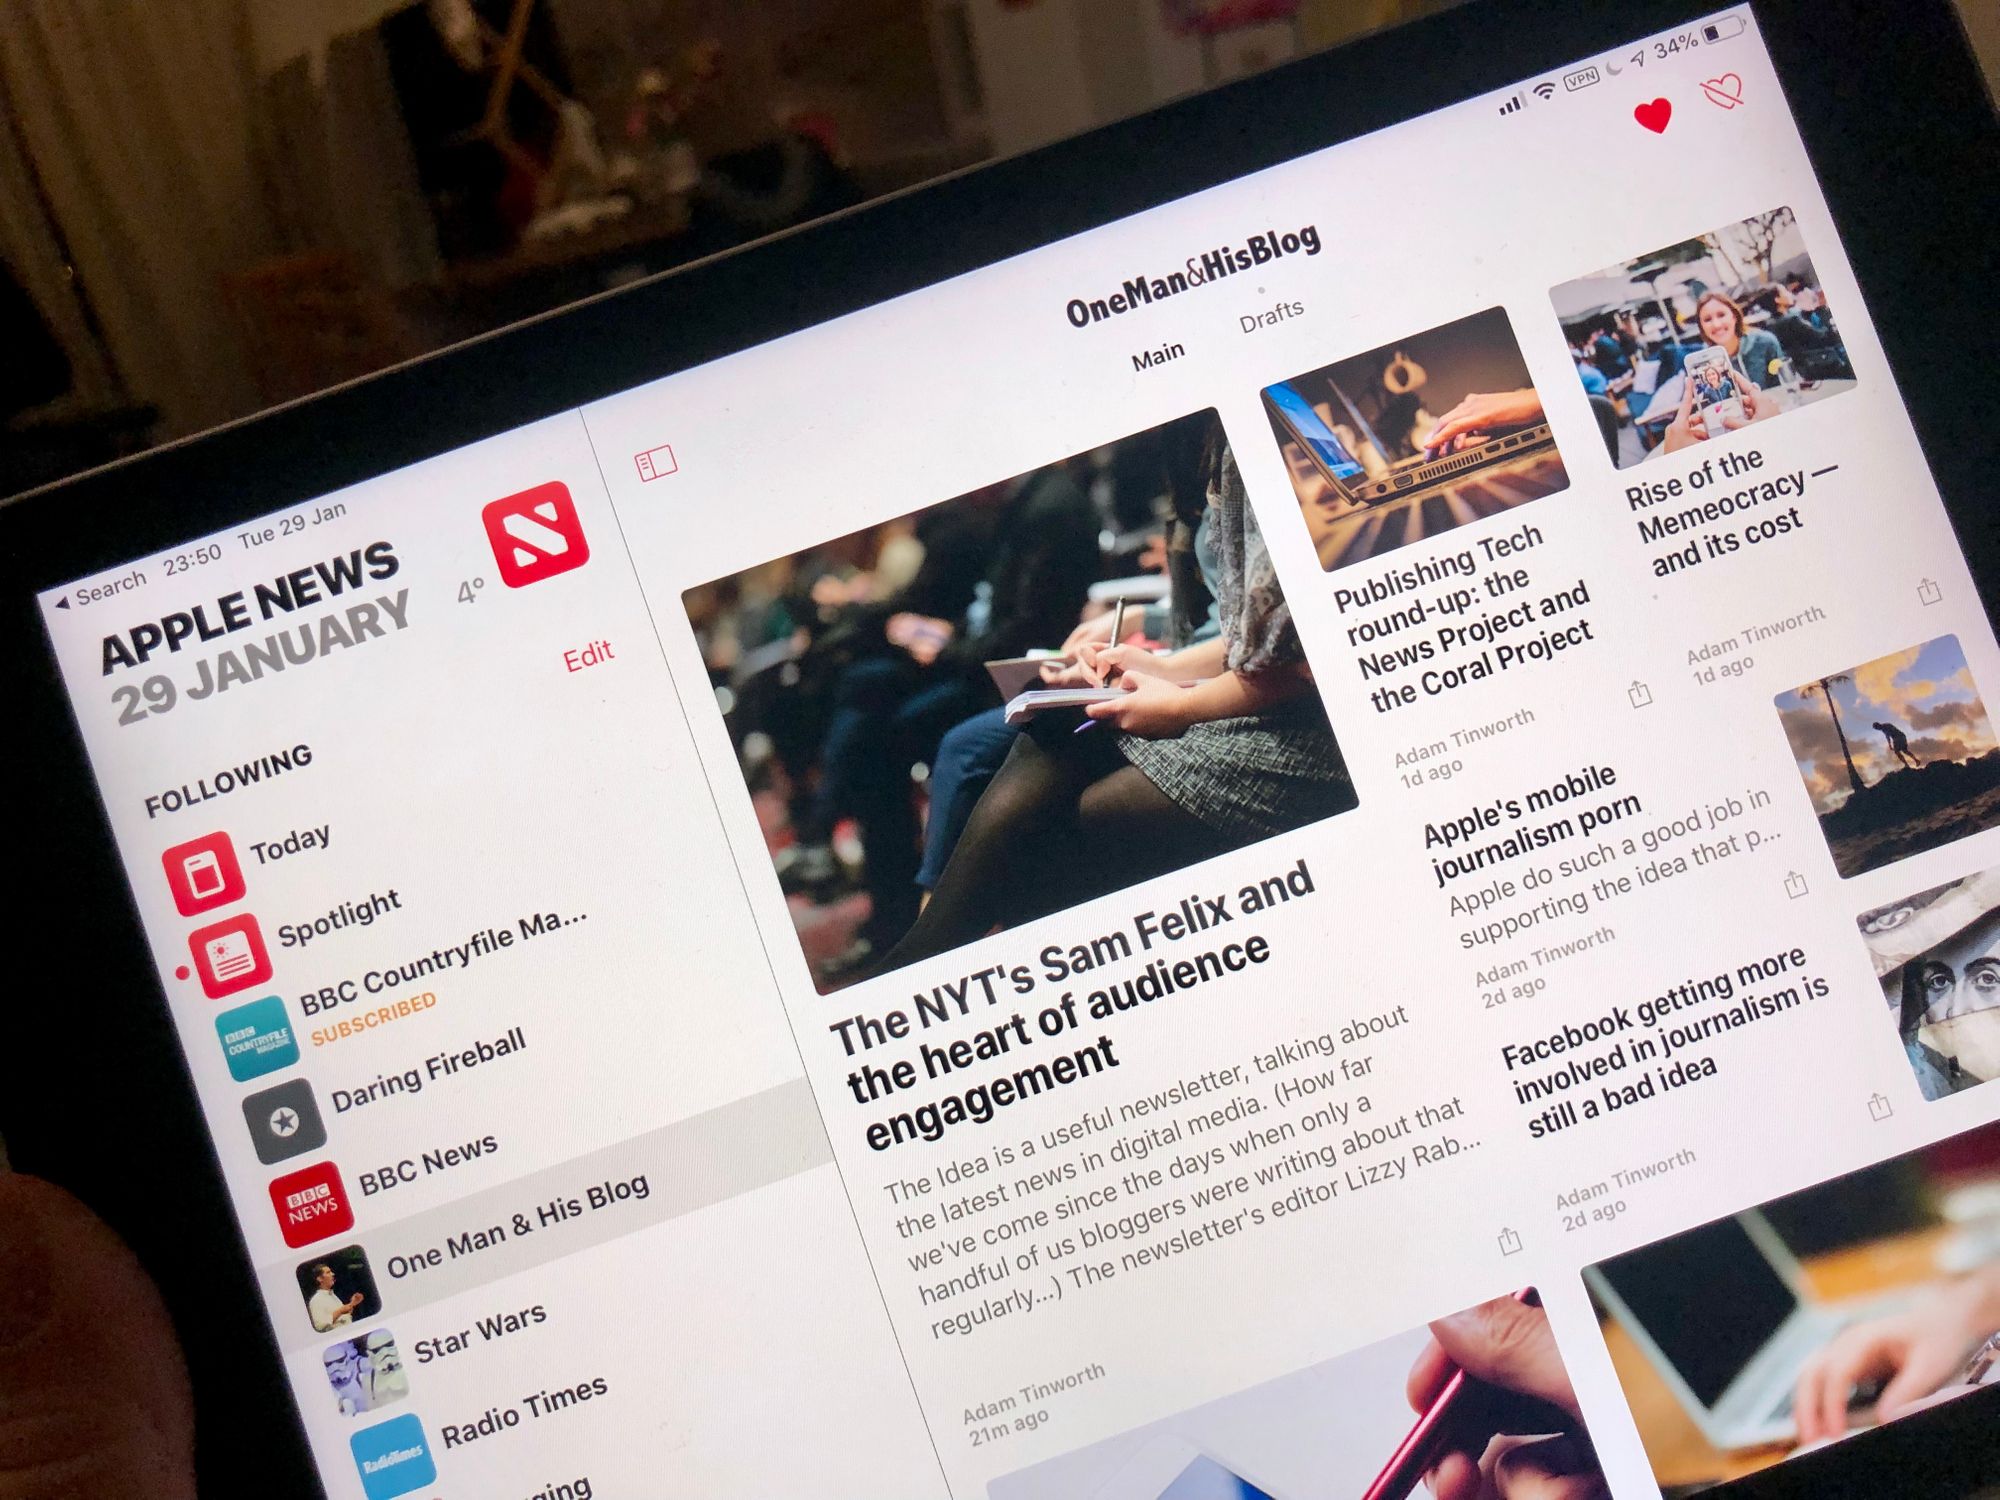 Apple News has more users than we thought